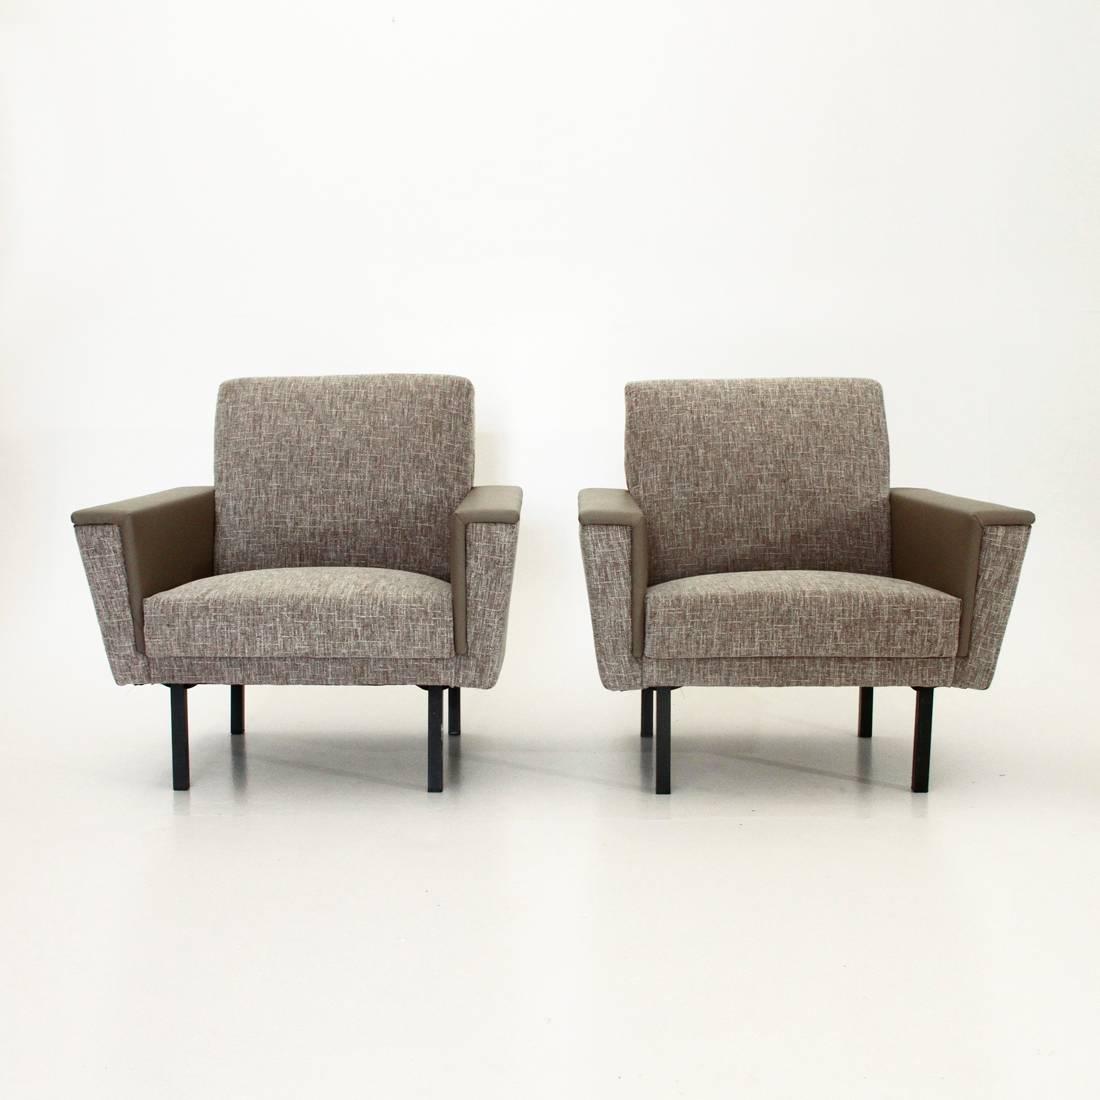 Two 1950s Italian manufacture armchairs.
Upholstered and lined wooden structure with new gray fabric and gray leather armrests.
Legs painted in black metal.
Very good general conditions.

Dimensions: Width 76 cm, depth 76 cm, height 75 cm, seat